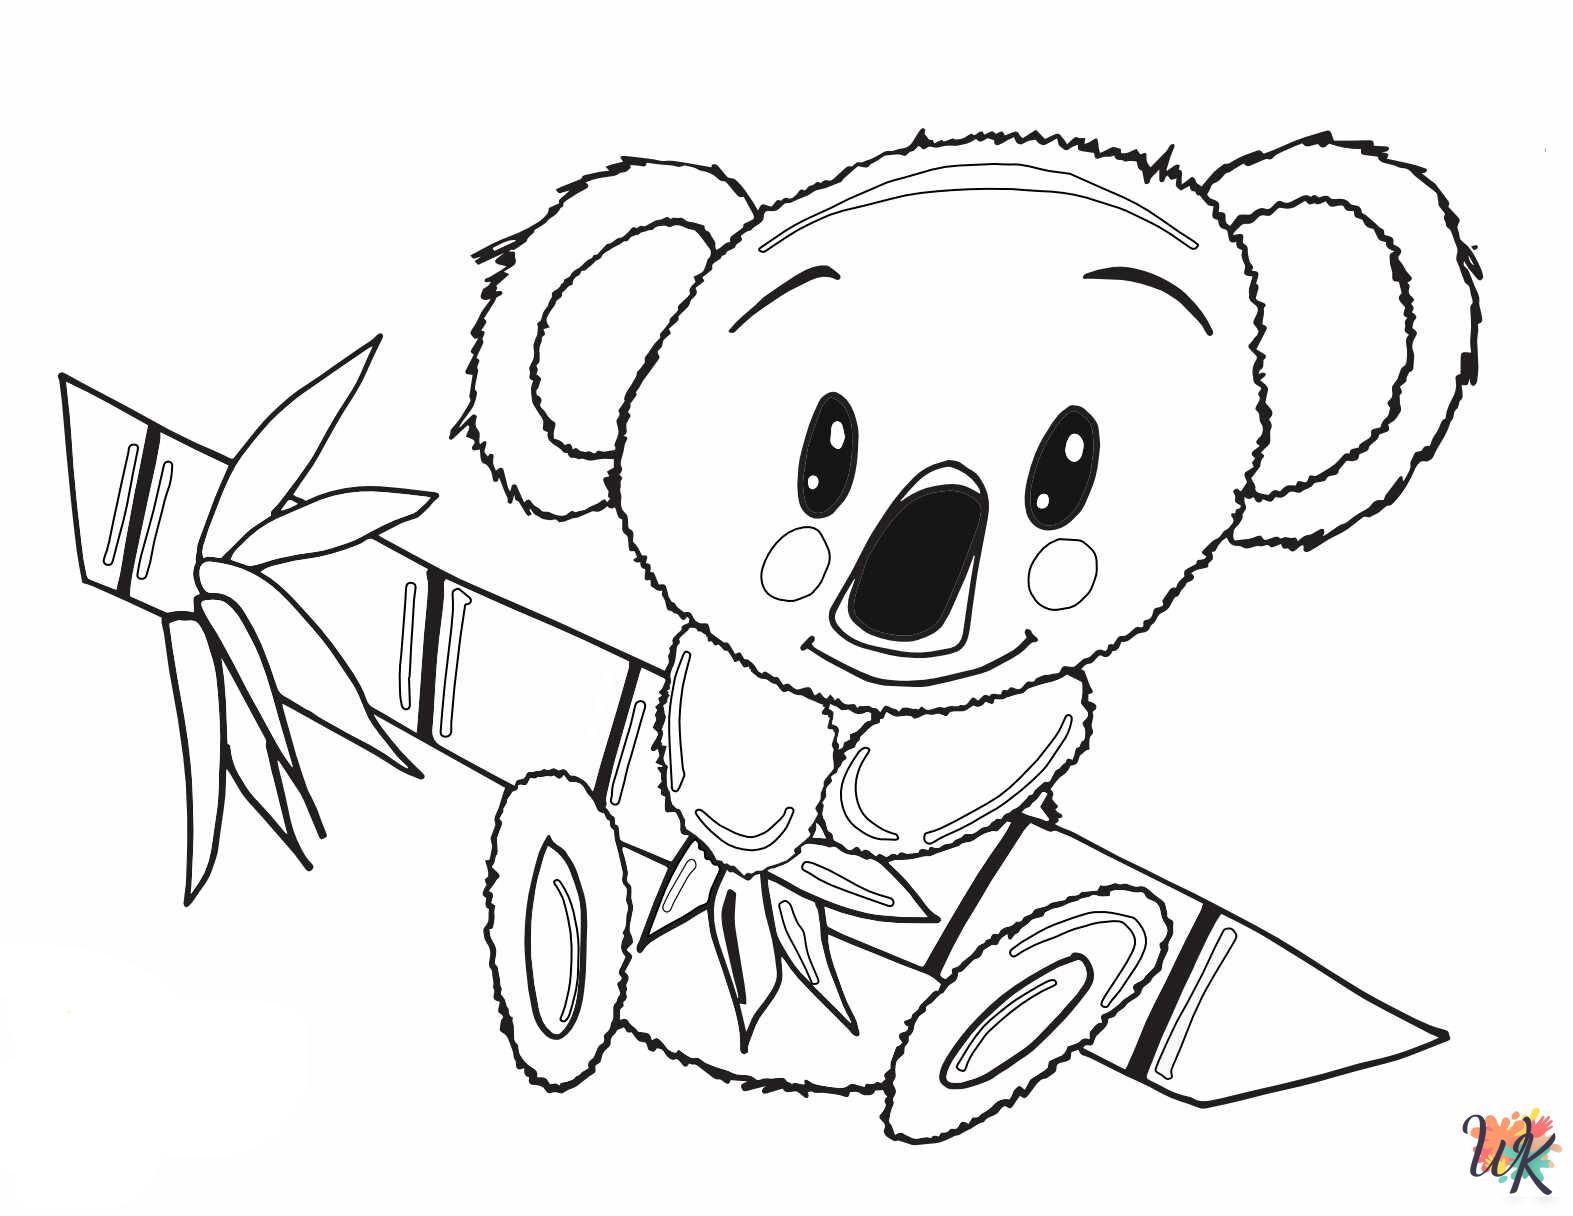 Koala decorations coloring pages